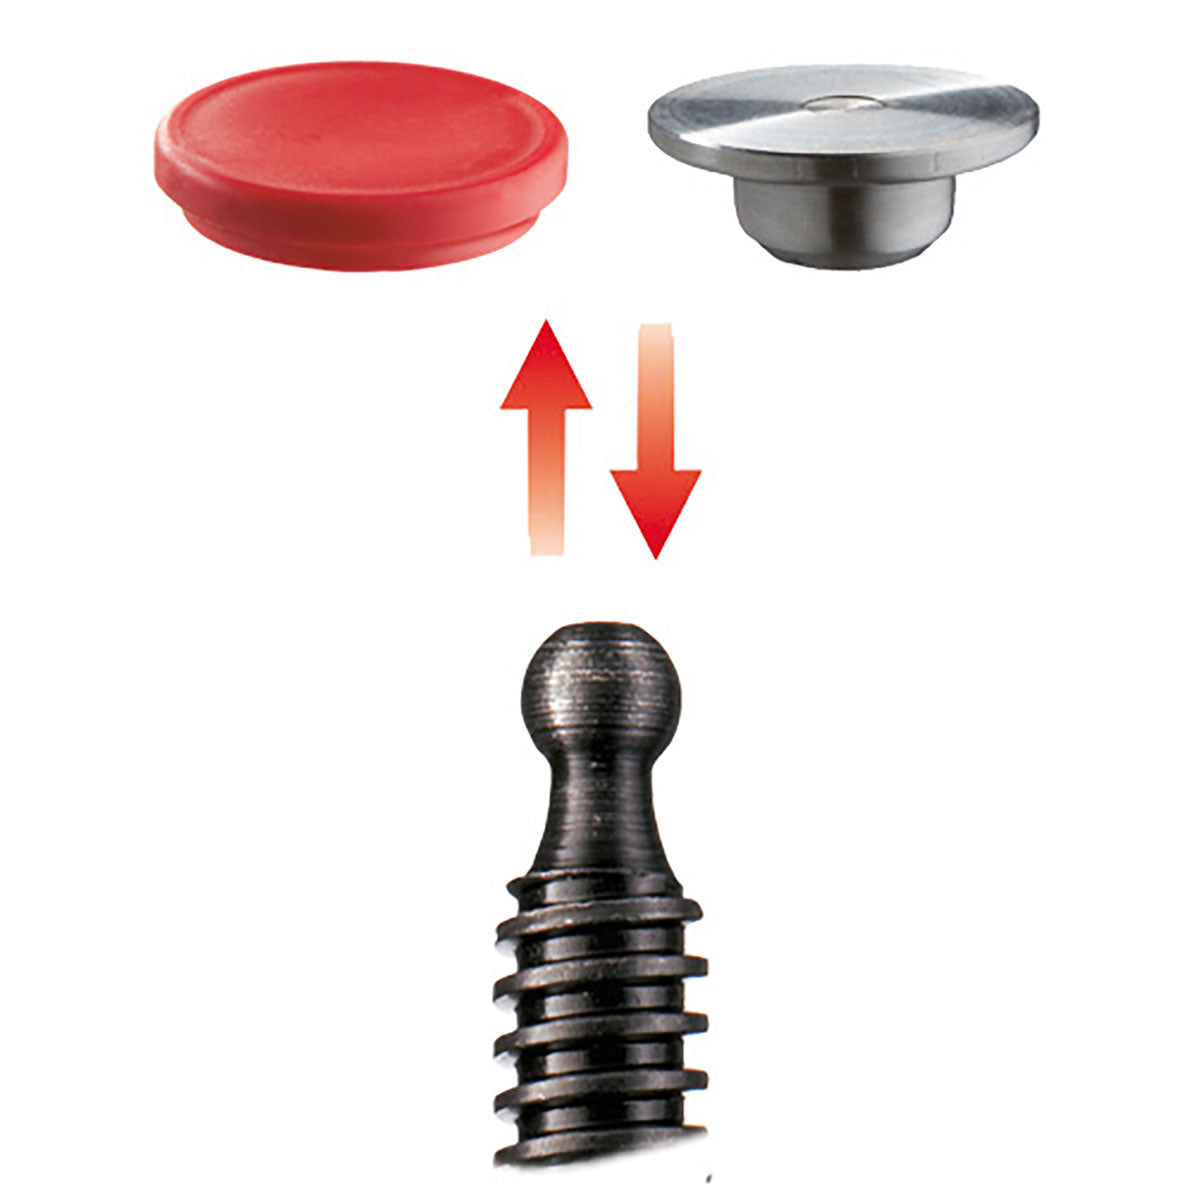 Bessey TG80S12-2K - Tightening screw with two-component handle Bessey TG 800/120